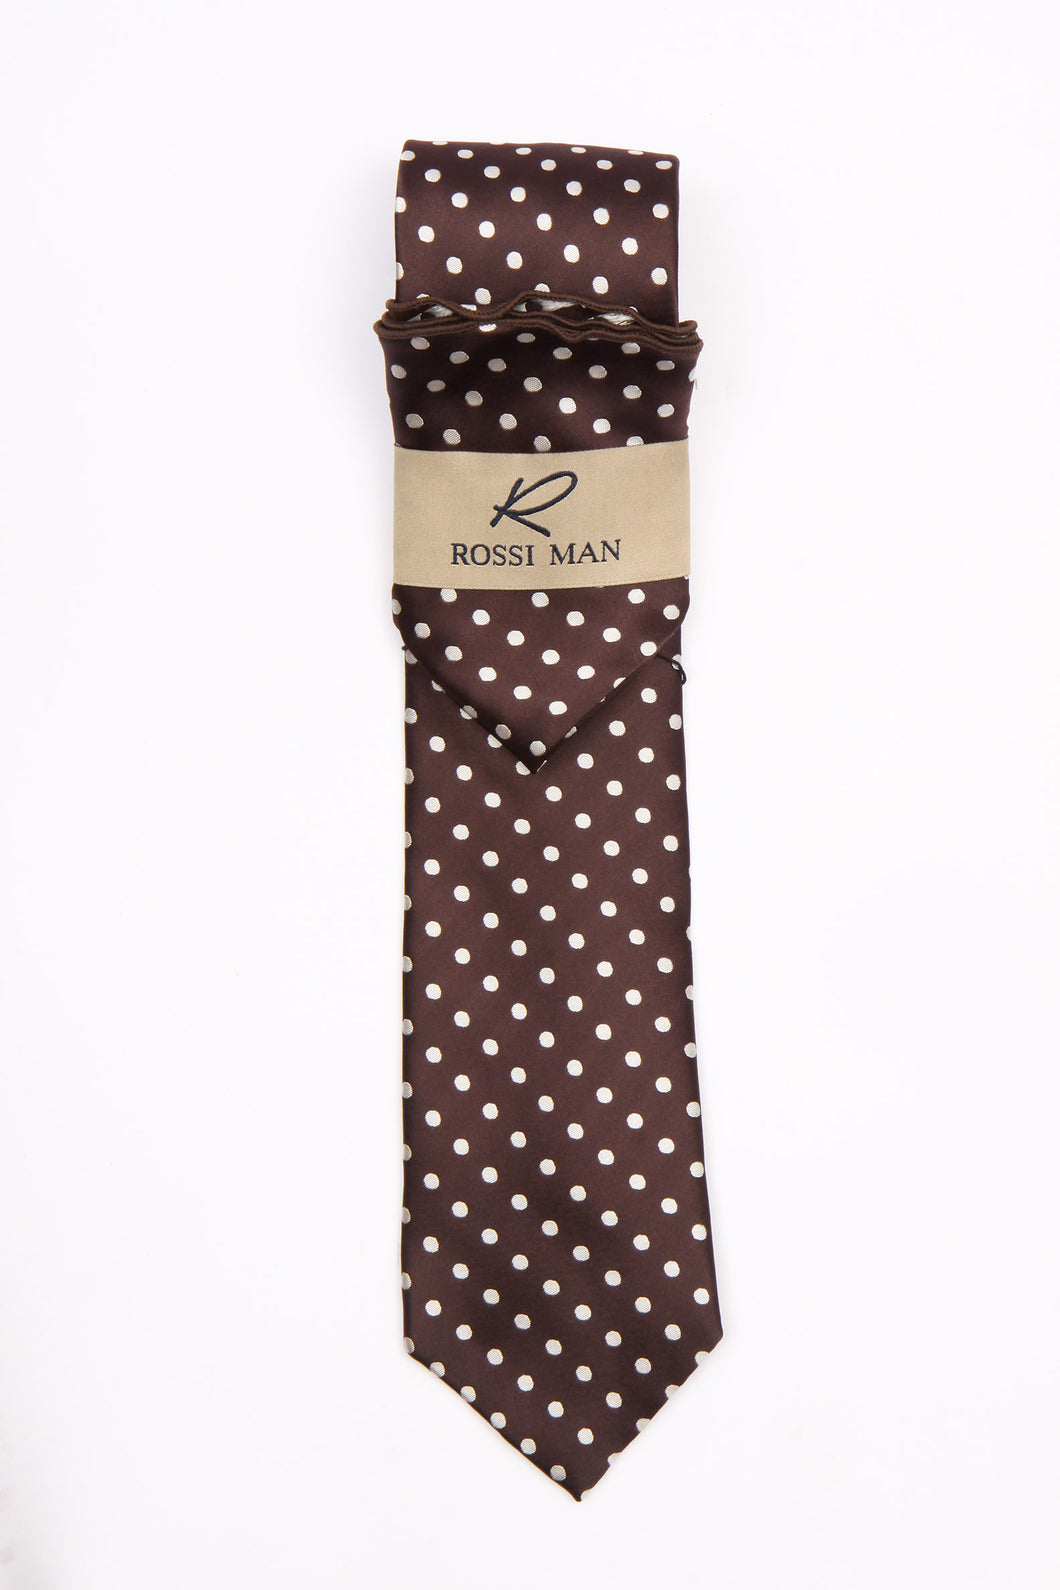 Rossi Man Tie and Pocket Round - RMR662-9